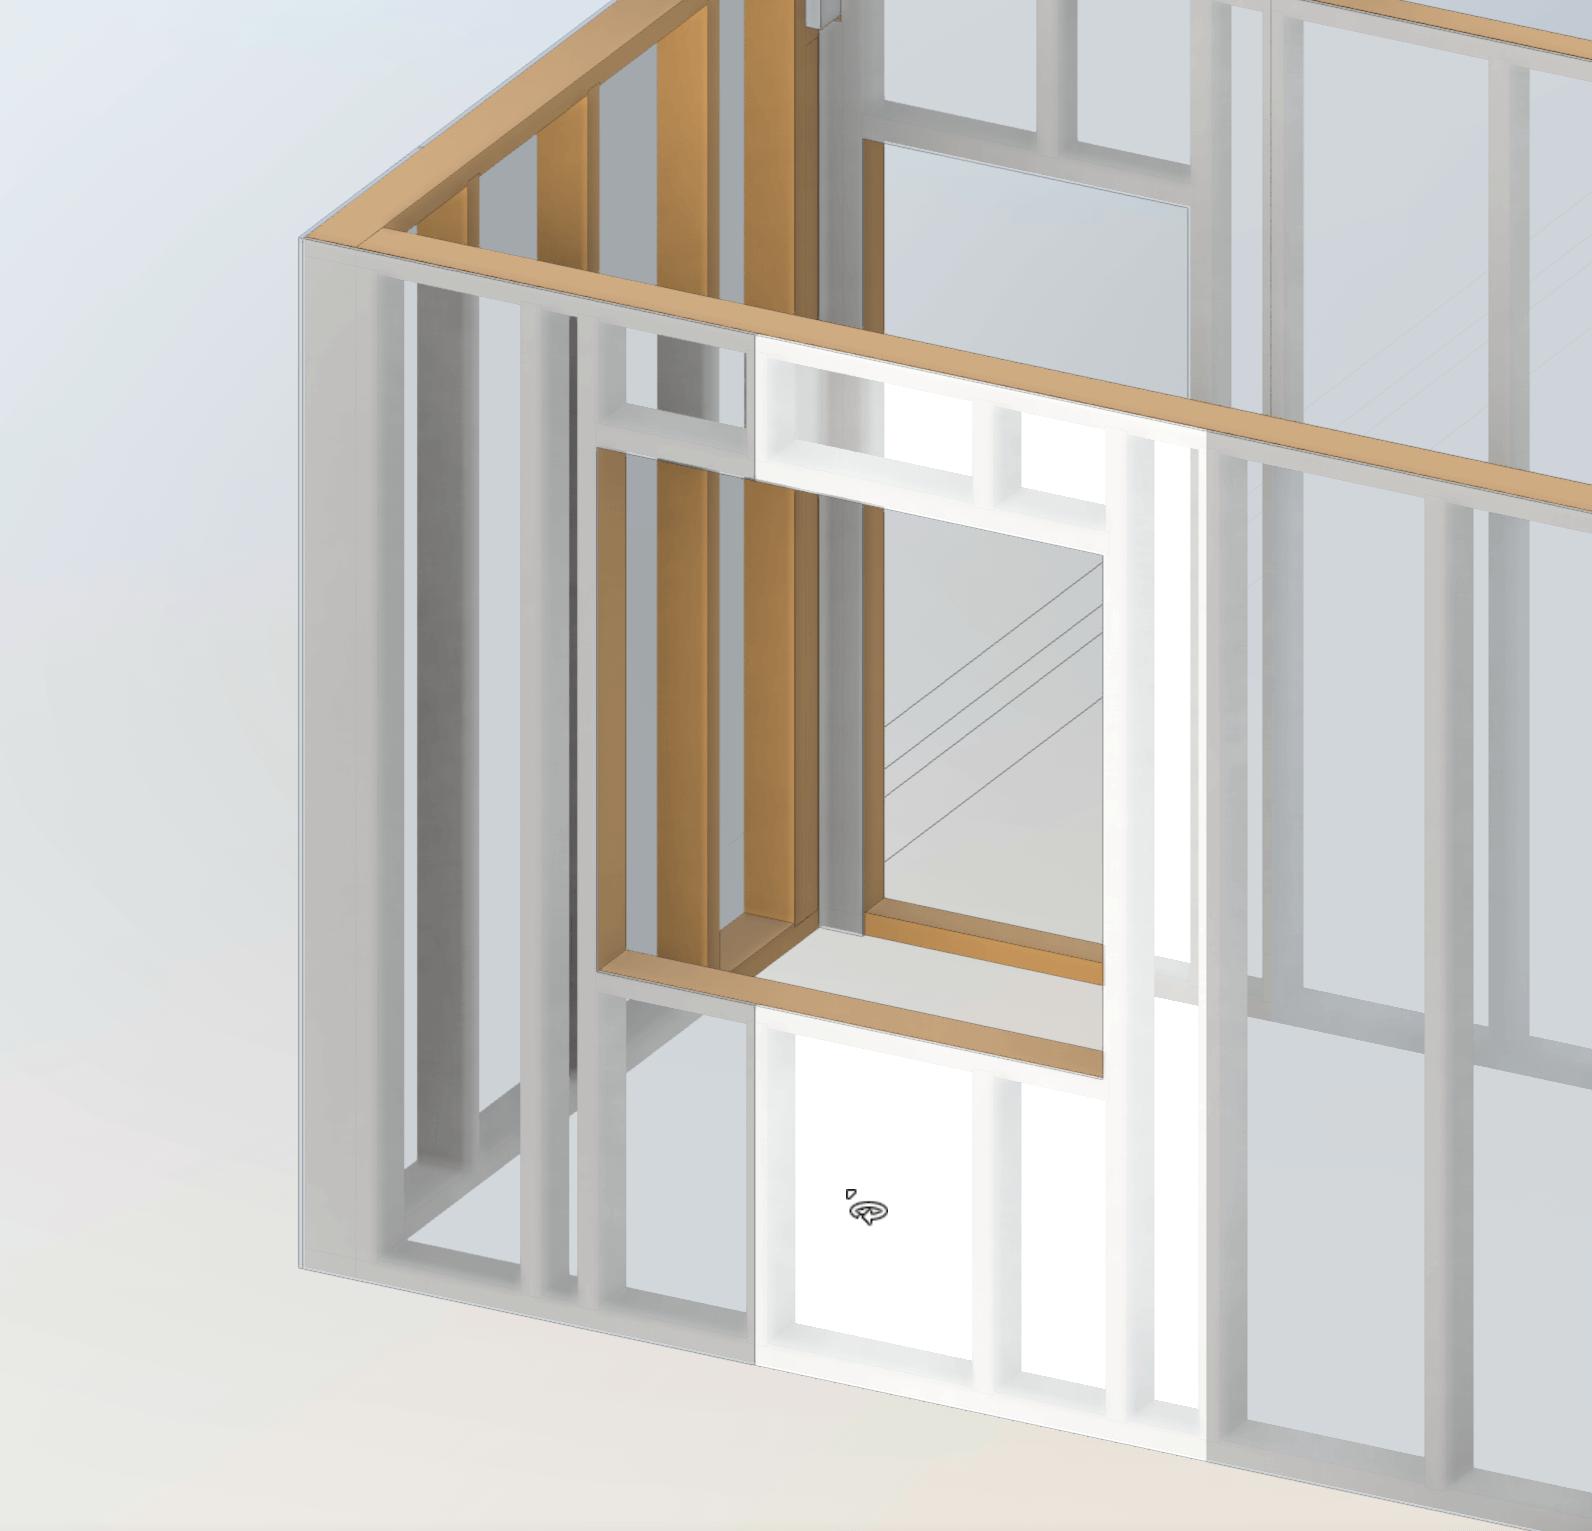 wood framed walls corner intersection and window opening